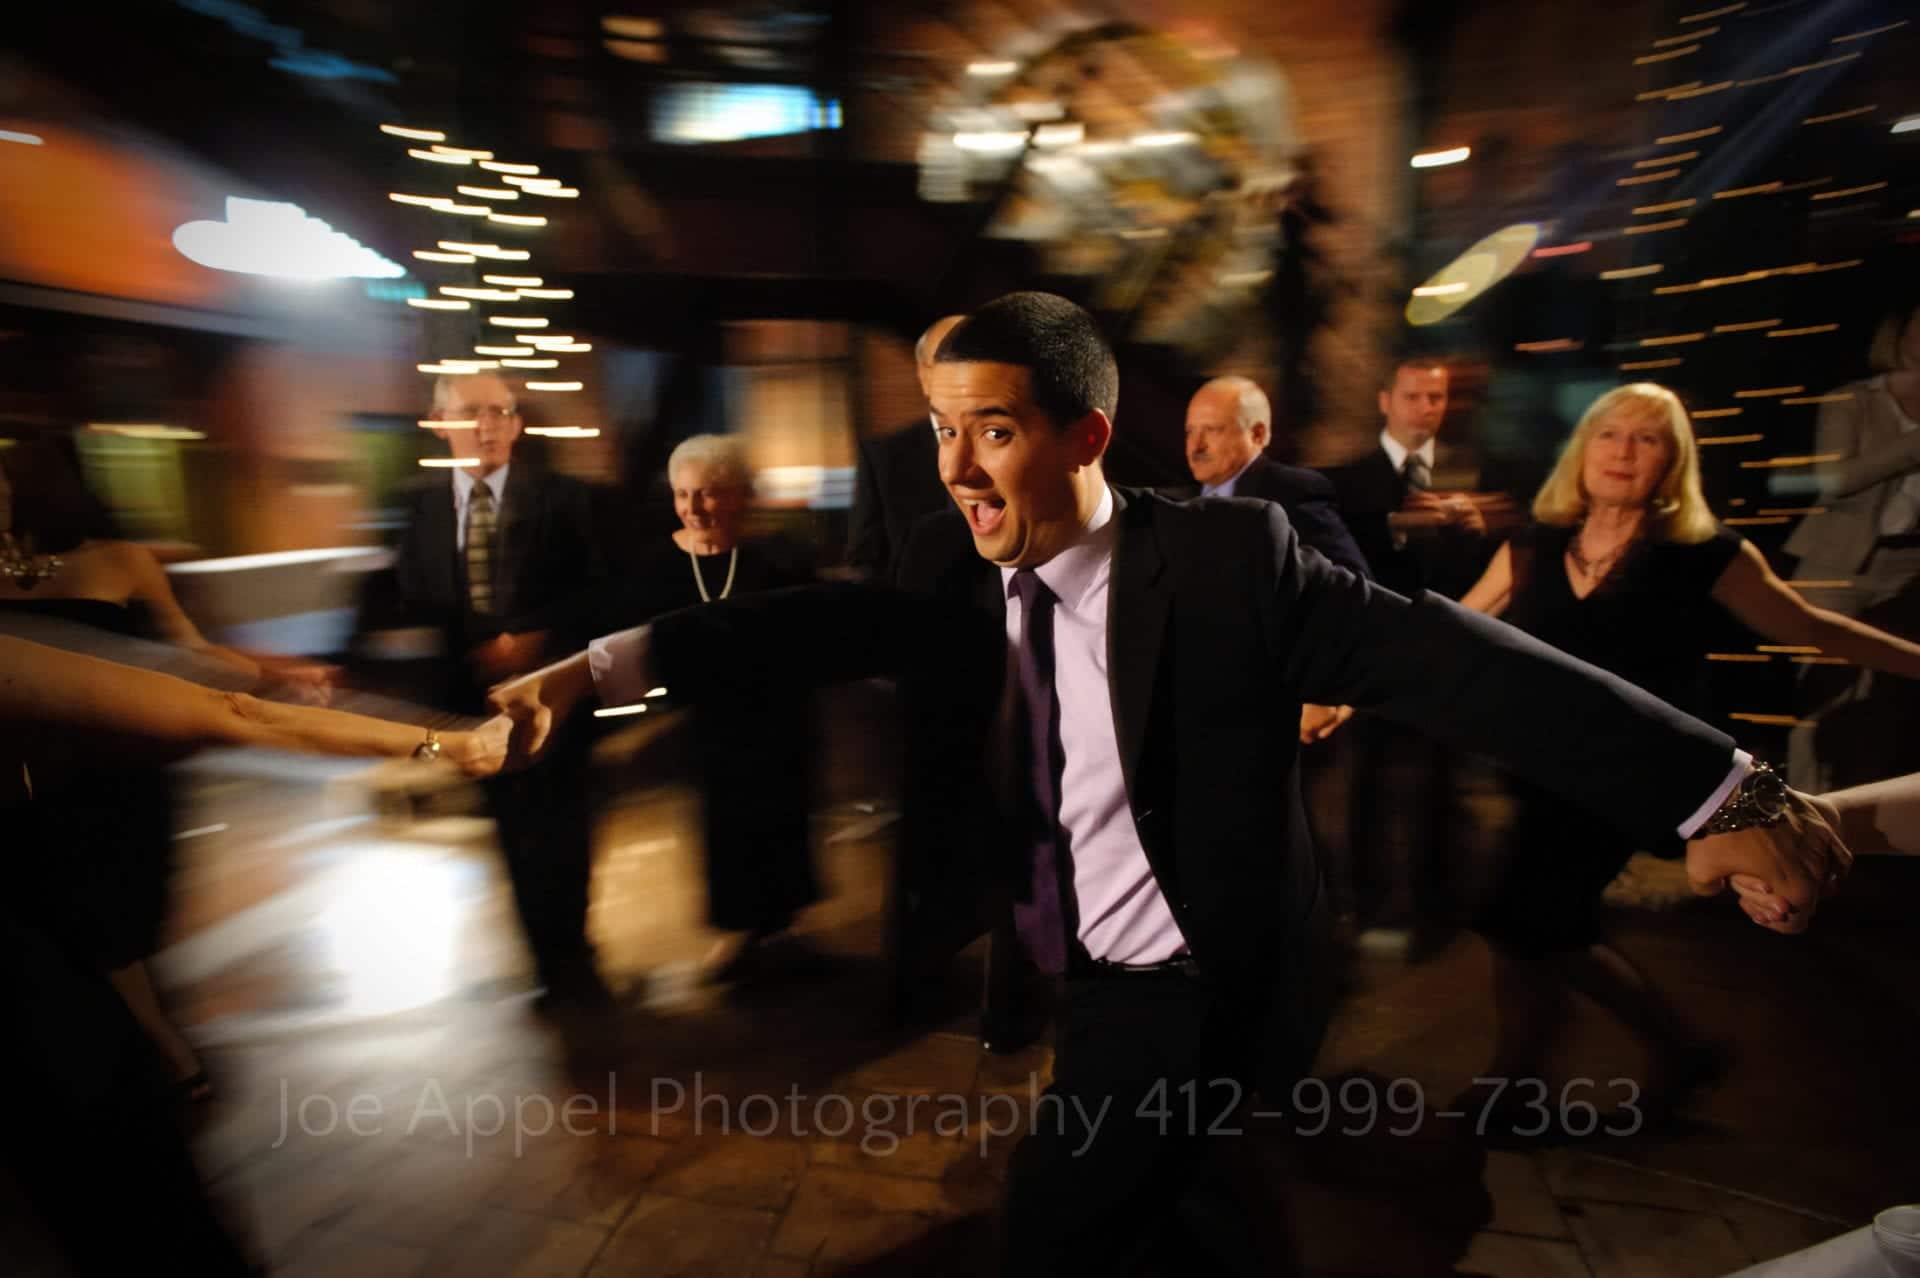 A man yells as he holds hands and dances in a circle with other wedding guests. The background is blurred and shows motion.